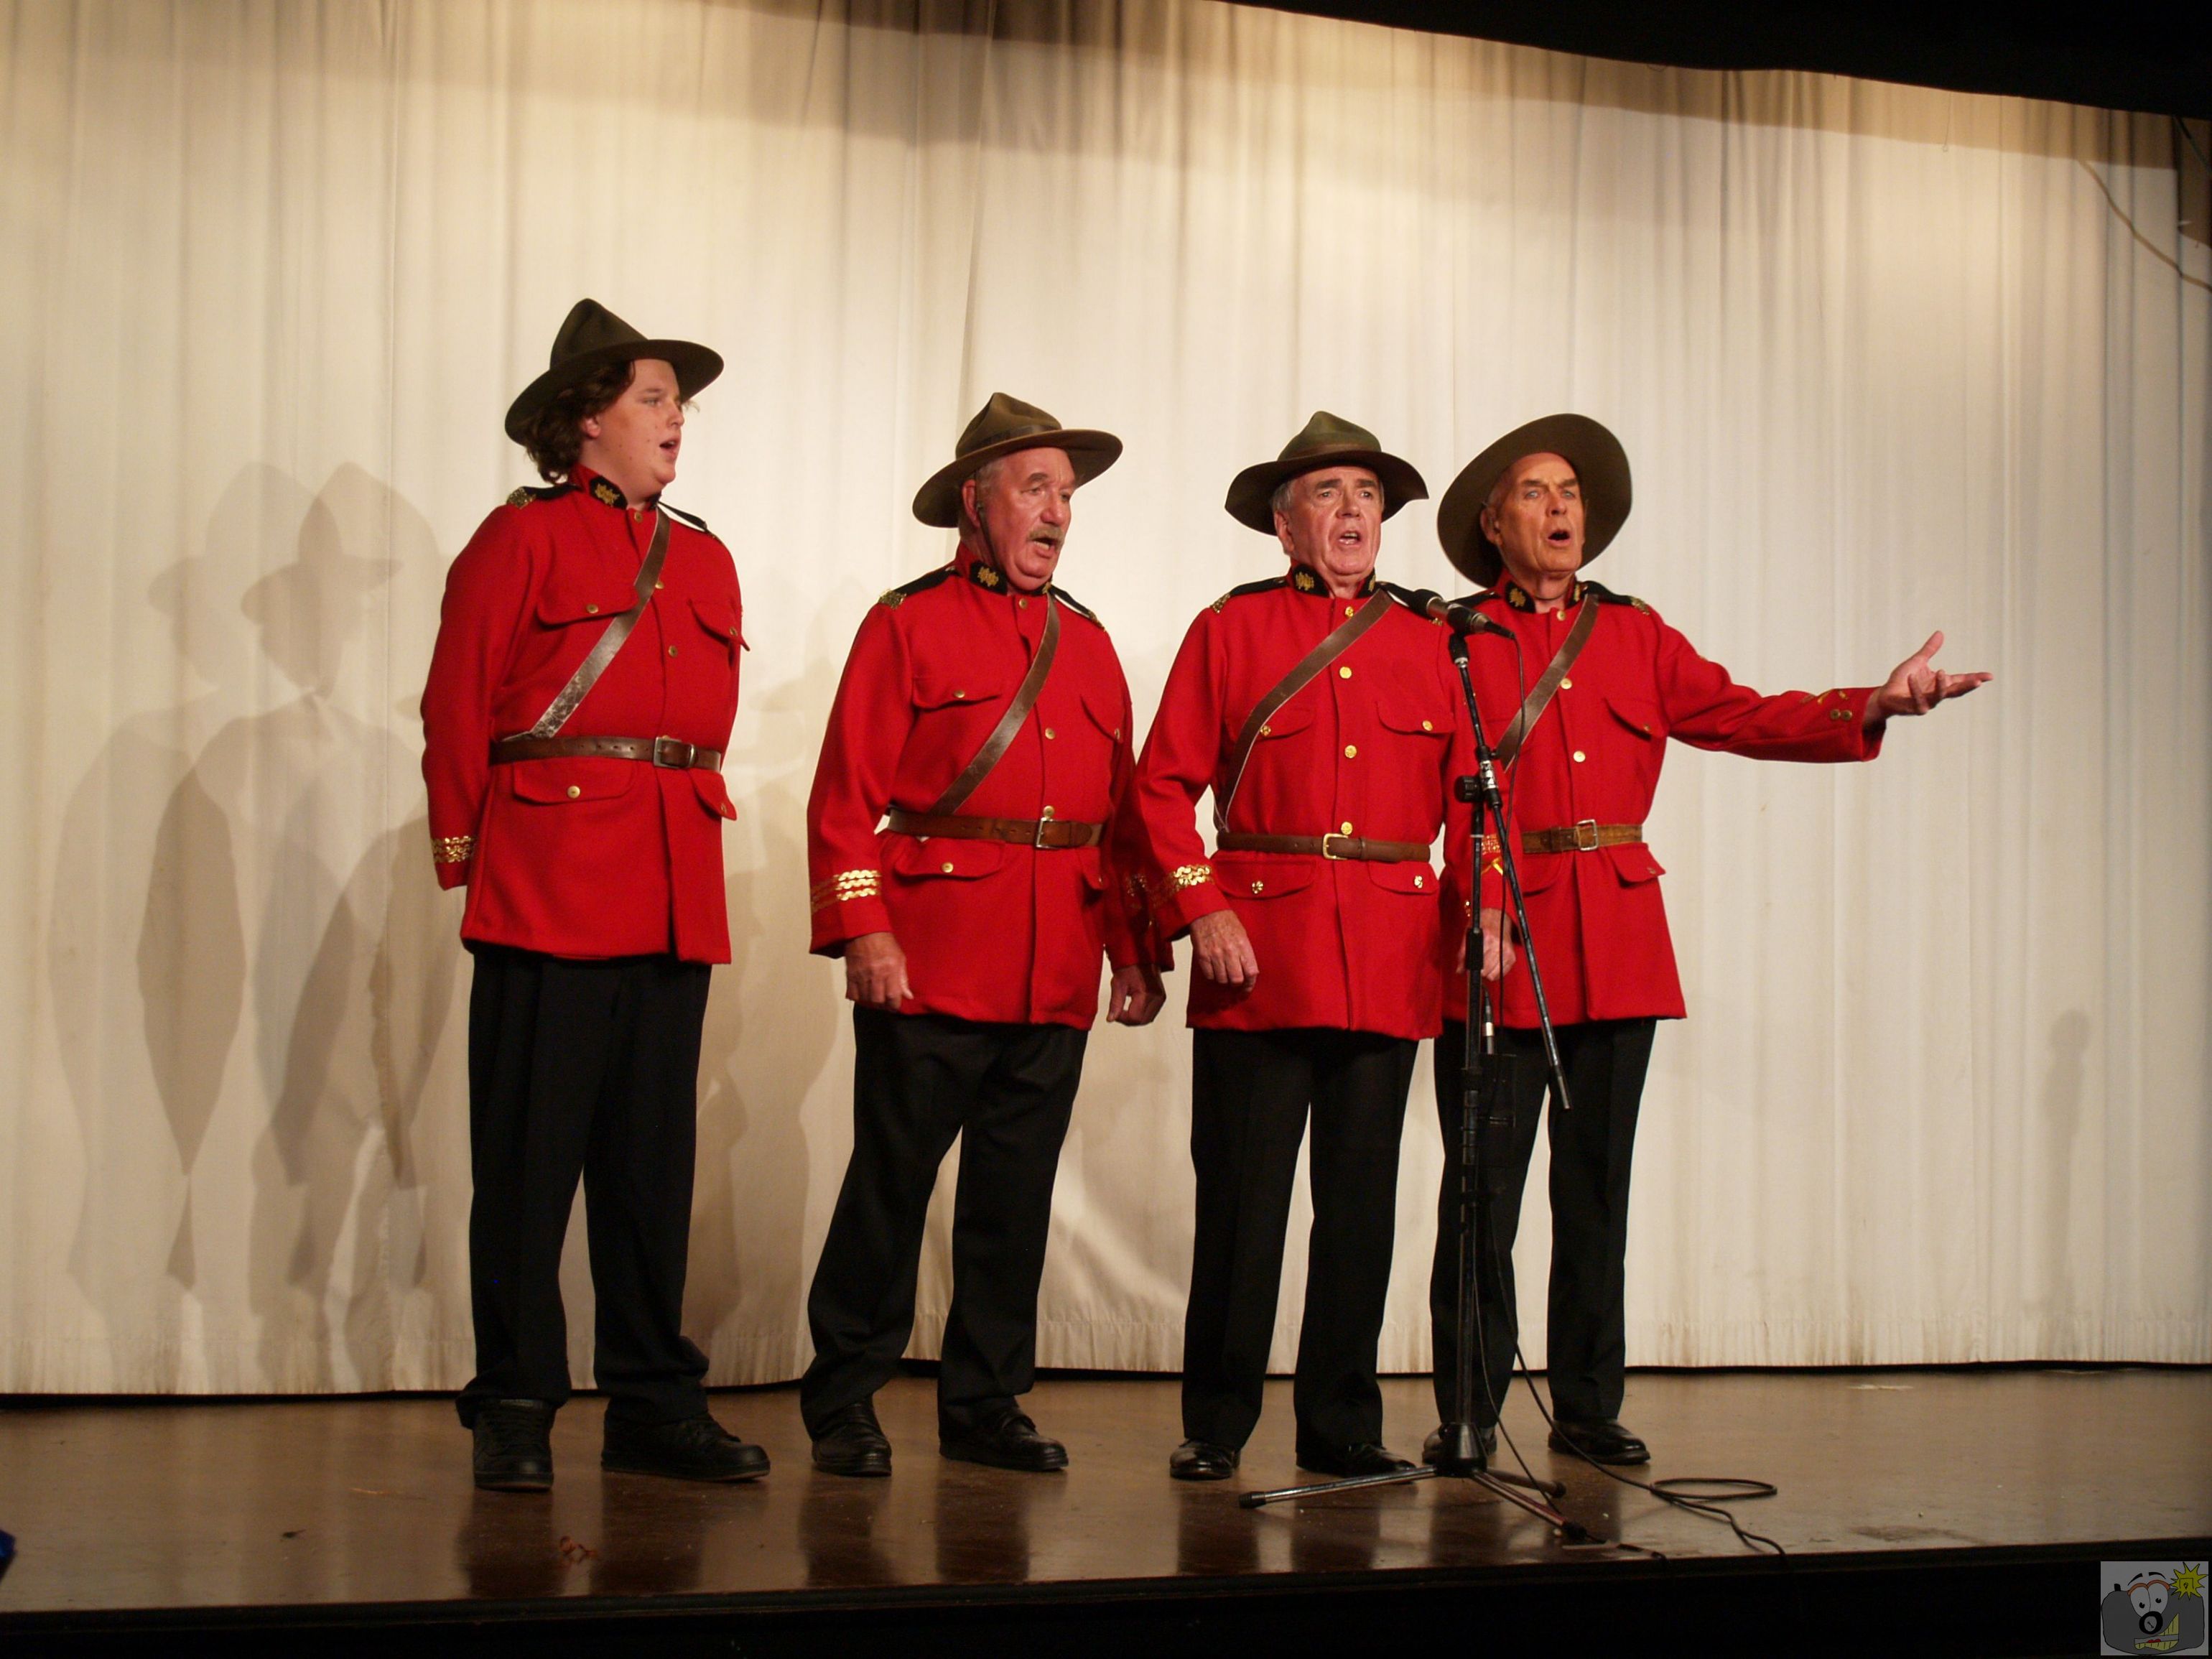 Canadians Mounties